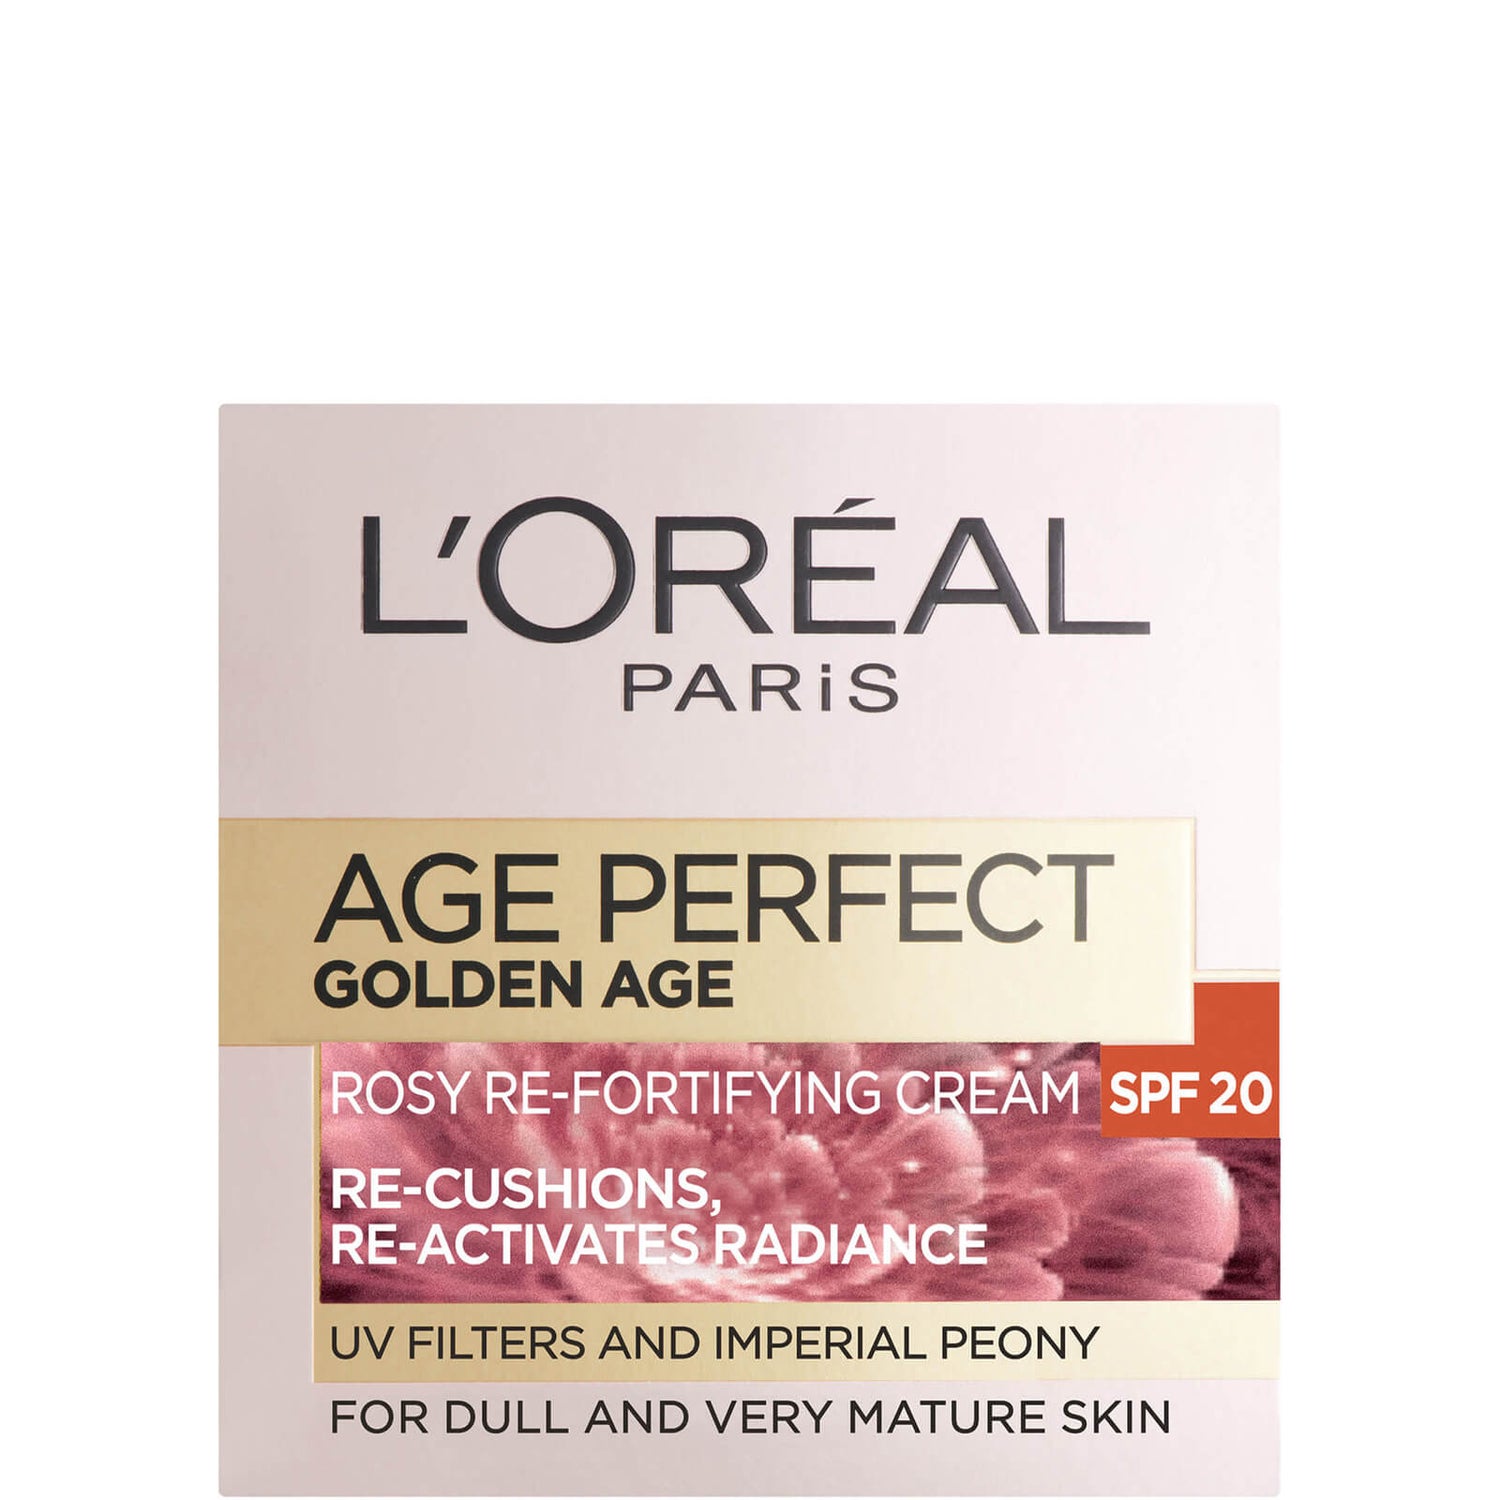 L'Oréal Paris Age Perfect Golden Age Rich Refortifying Cream - SPF15 (50 ml)